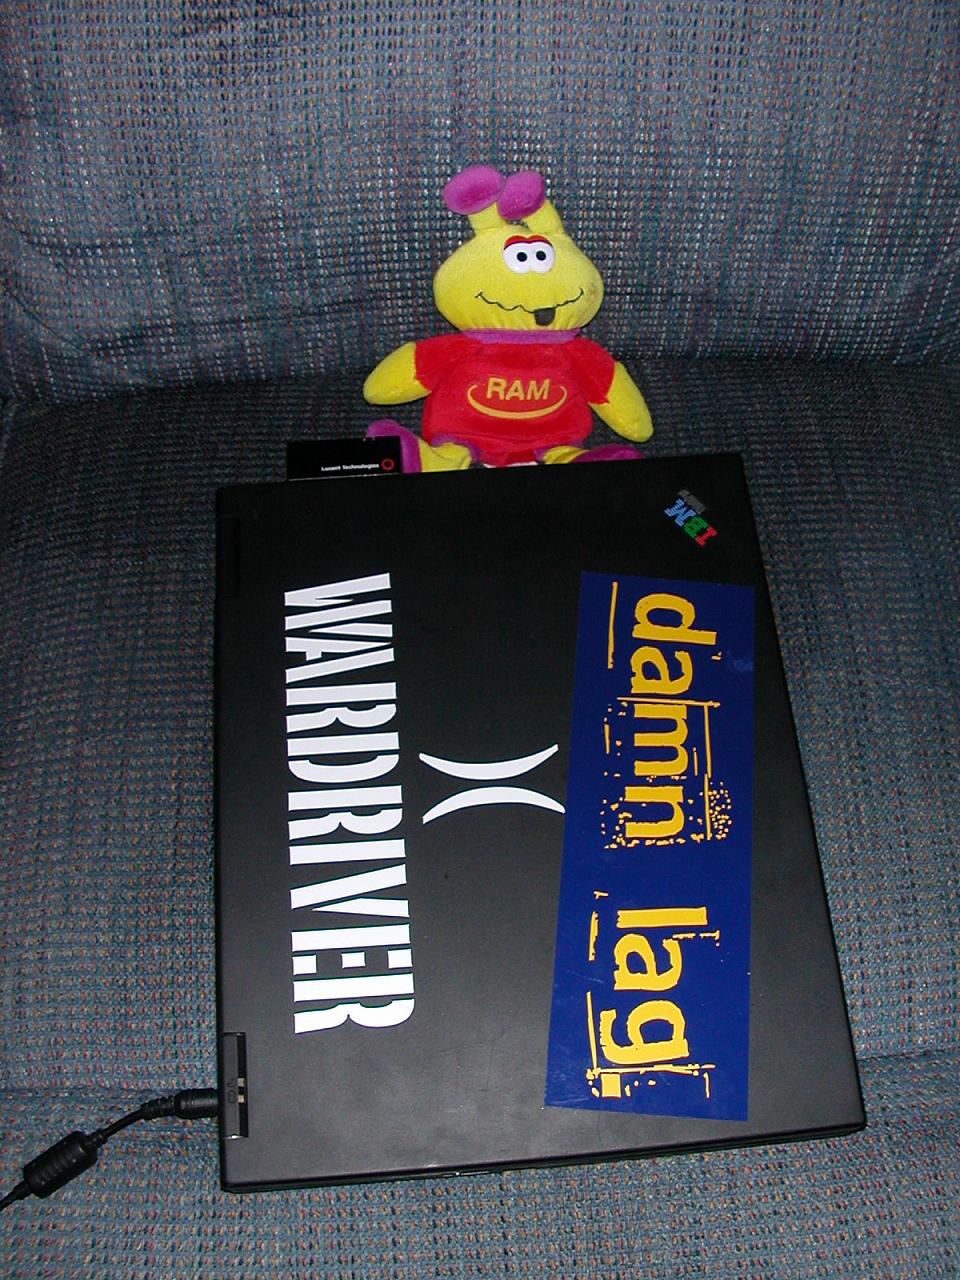 A picture of the lid of the laptop and a stuffed guy thrown in for good measure.